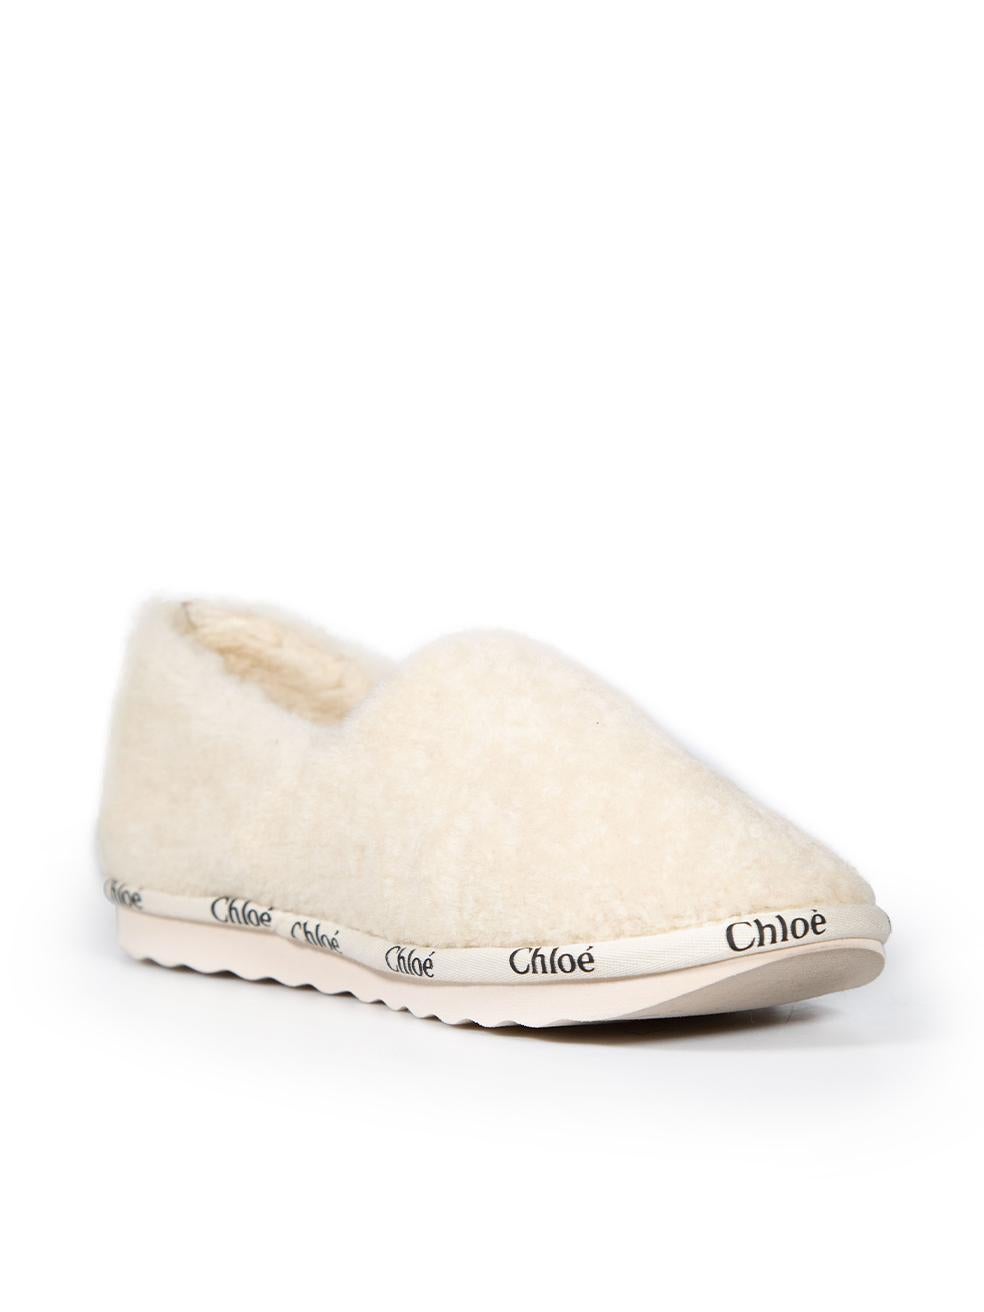 CONDITION is Very good. Hardly any visible wear to slippers is evident on this used Chloé designer resale item. These slippers come with original box.
 
 
 
 Details
 
 
 Ecru
 
 Shearling
 
 Slippers
 
 Round toe
 
 Logo trim detail
 
 
 
 
 
 Made